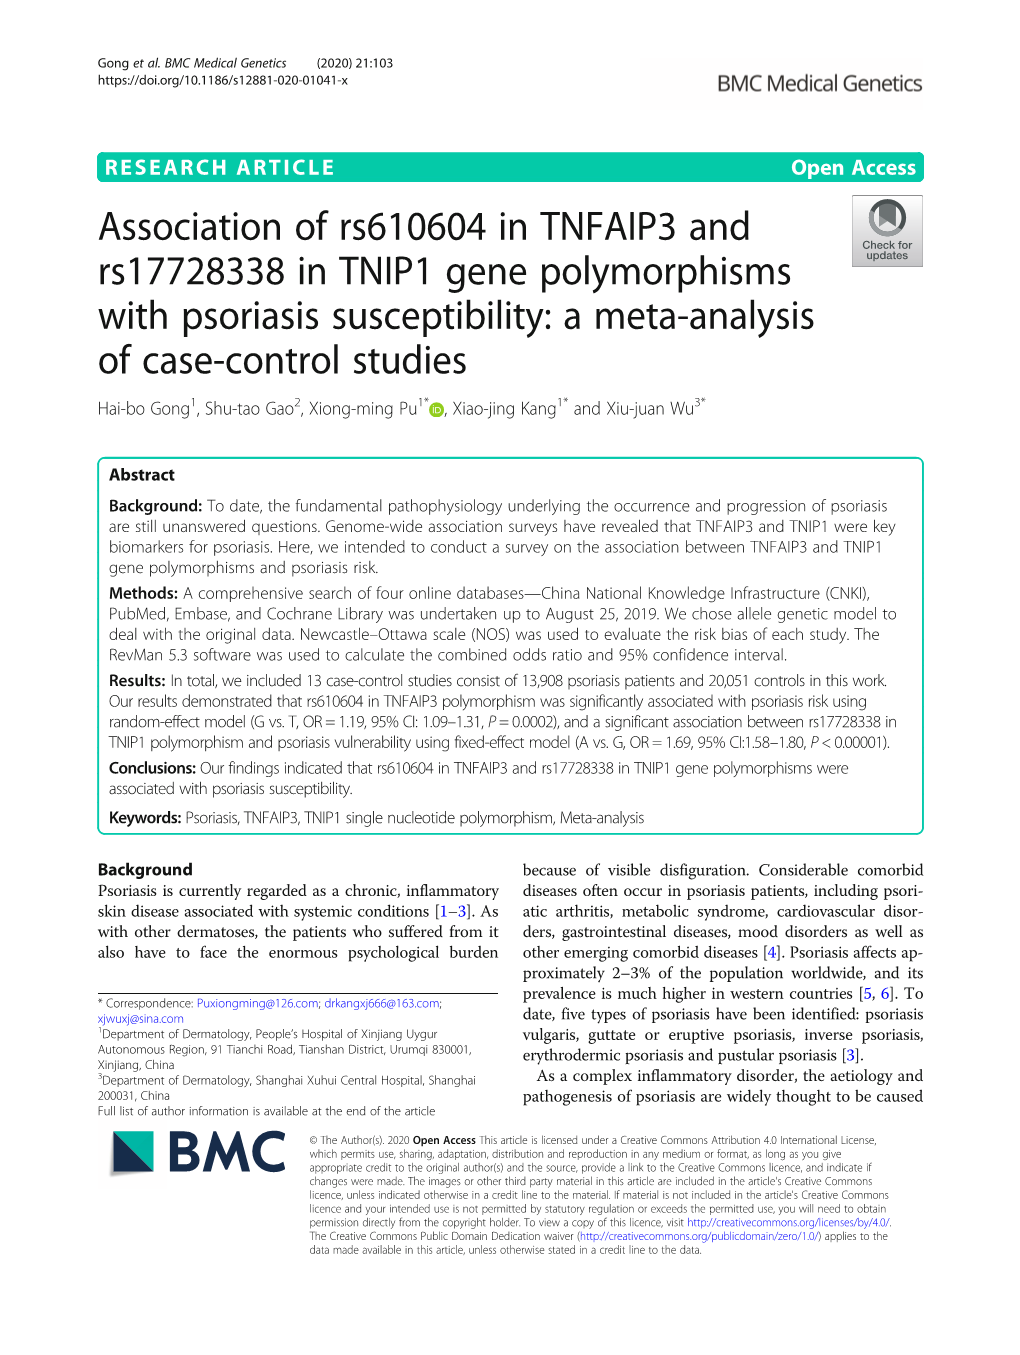 Association of Rs610604 in TNFAIP3 and Rs17728338 in TNIP1 Gene